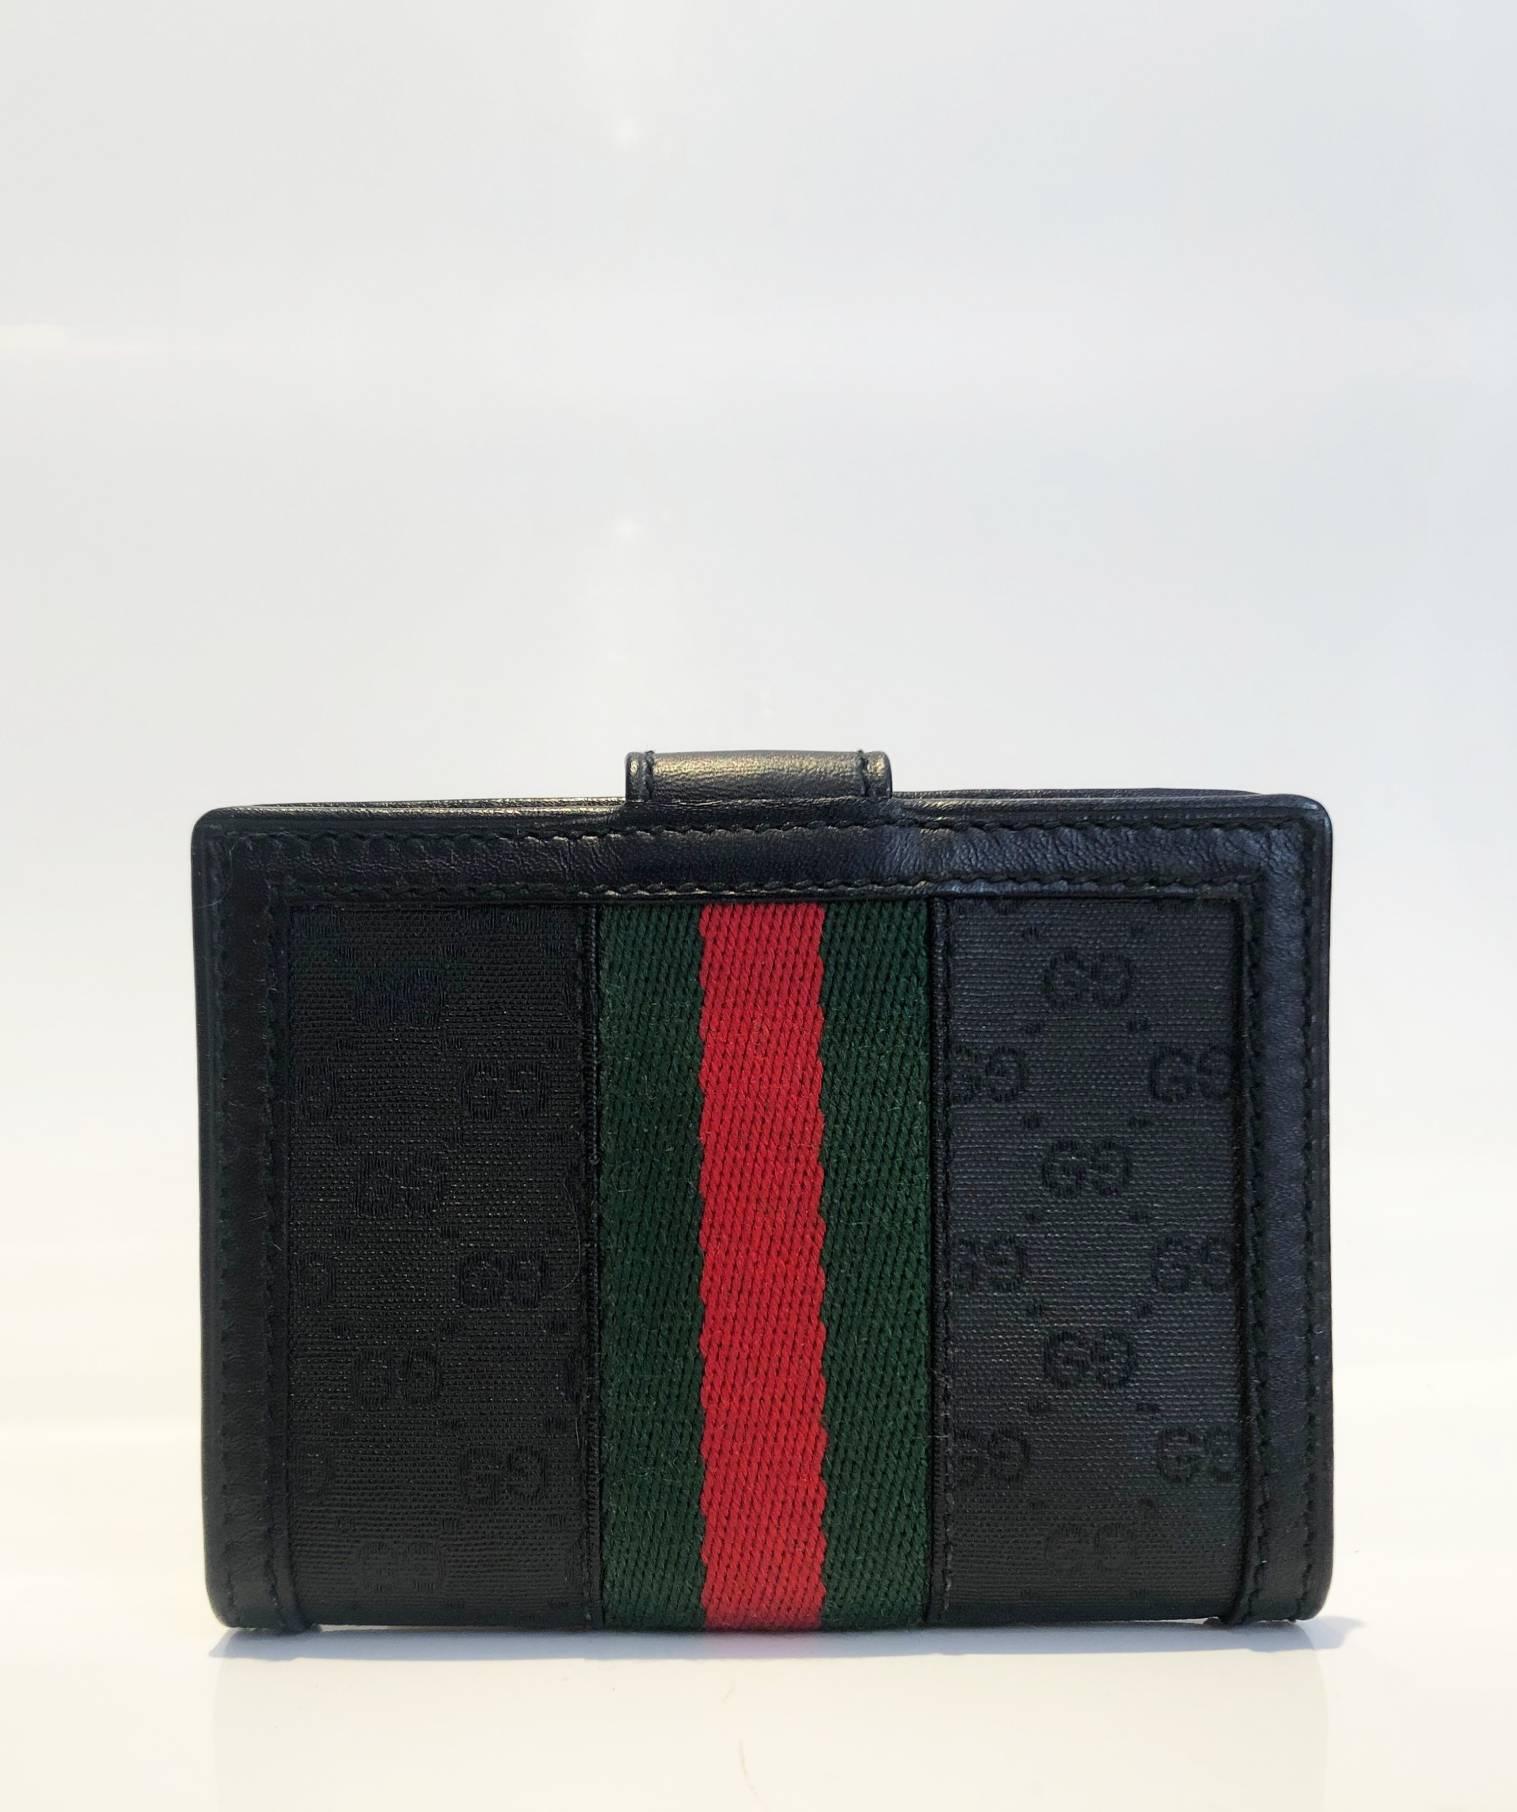 Gucci black web card holder featuring black monogram cloth and black leather, GG gold tone metal frontal logo, inside Gucci metal plaque, 2 internal compartment and plastic folder for cards, Made in Italy  

 Dimensions: 9x7x2cm 
Condition: 1980s,